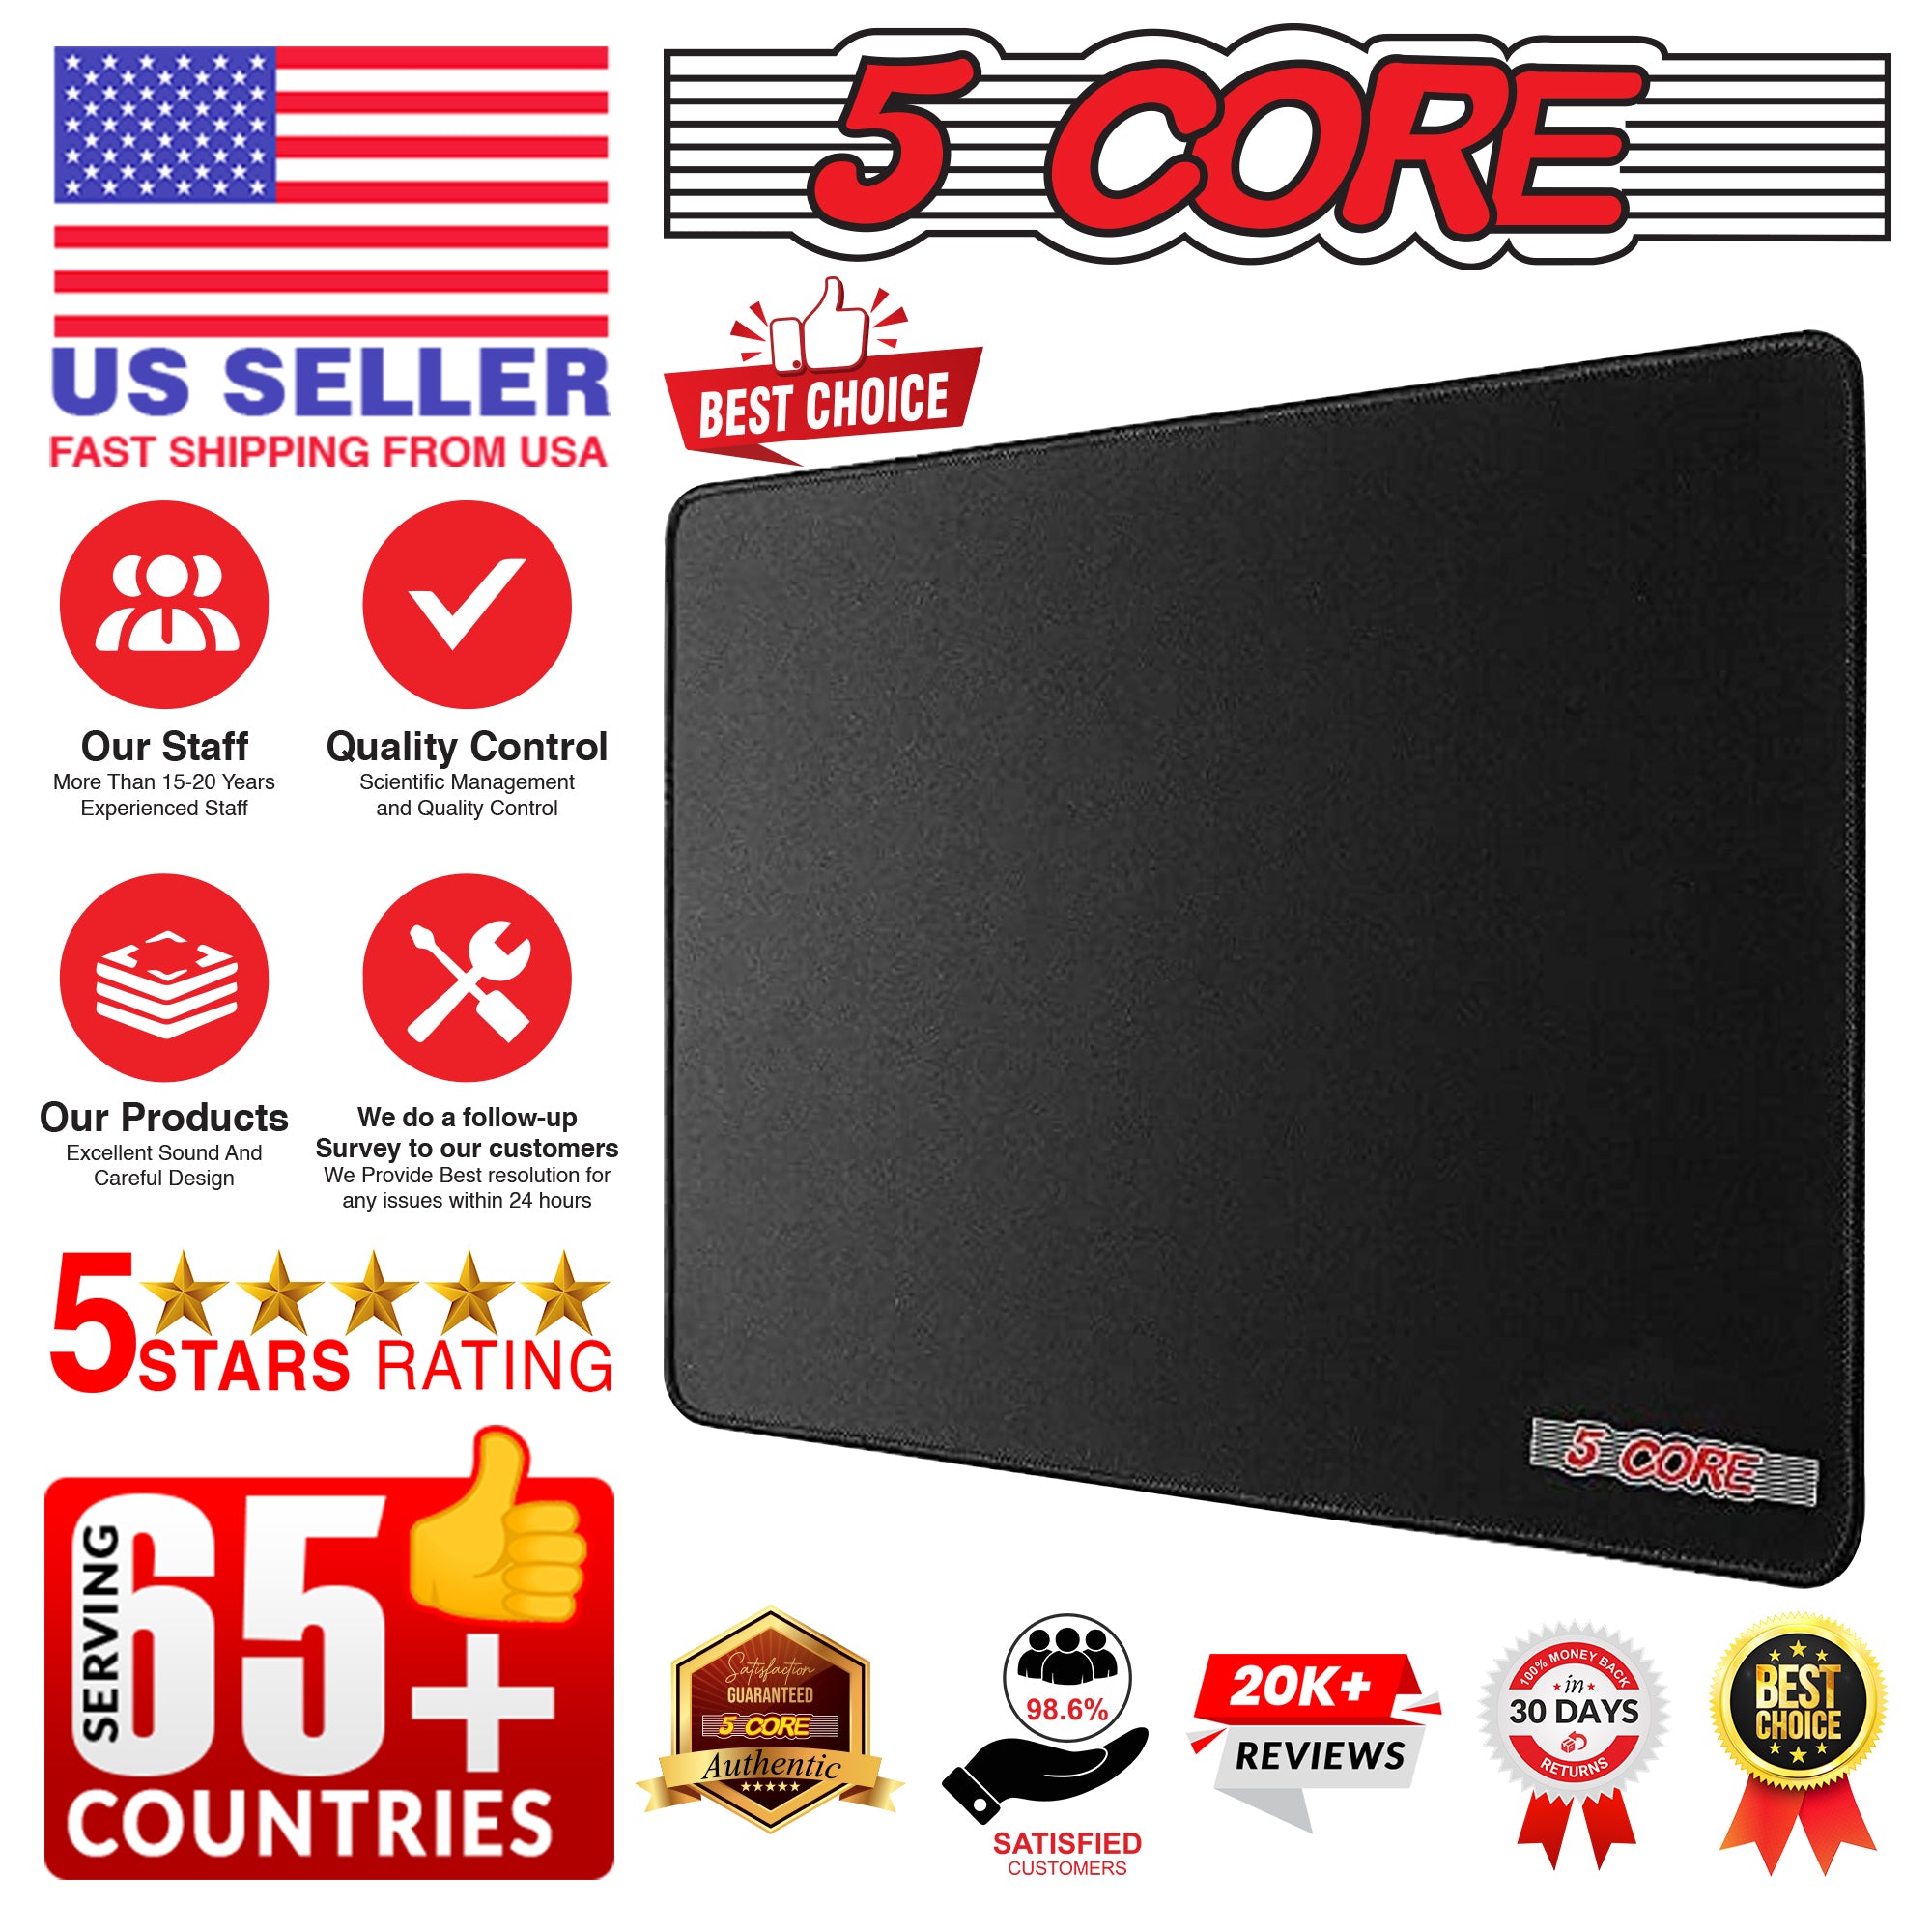 5 Core Mouse Pad 2 Pack • 3x3 Computer Mouse Mat w Anti-Slip Rubber Base • Fast Easy Gliding